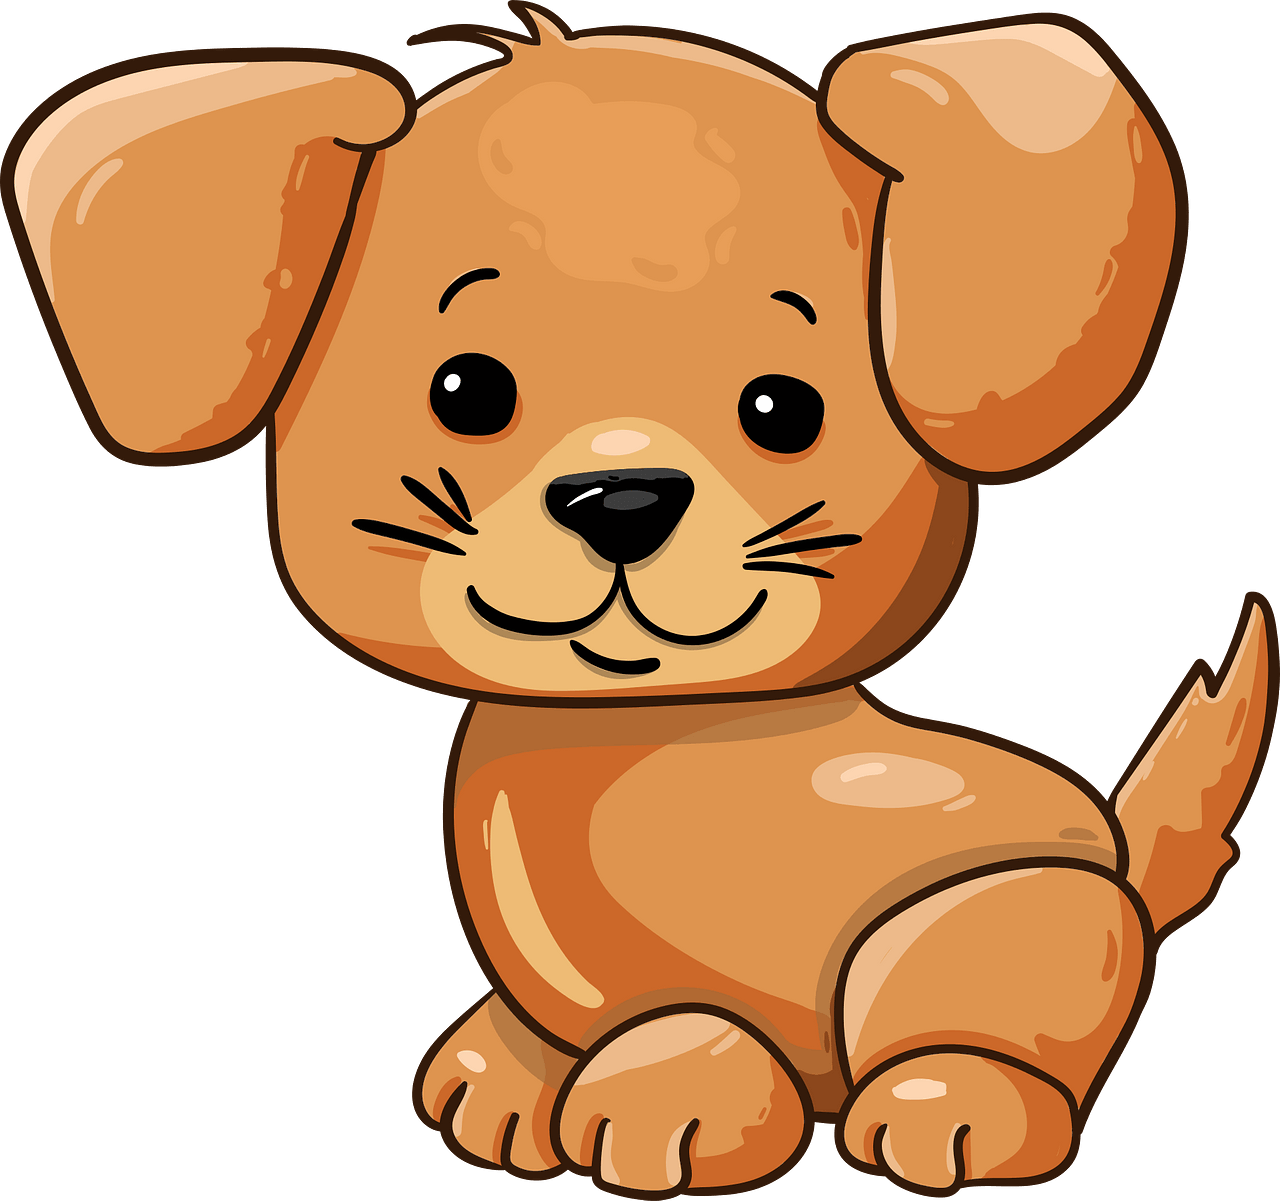 Puppy Pictures Of Cute Cartoon Puppies Clipart Image 1 Clipartix